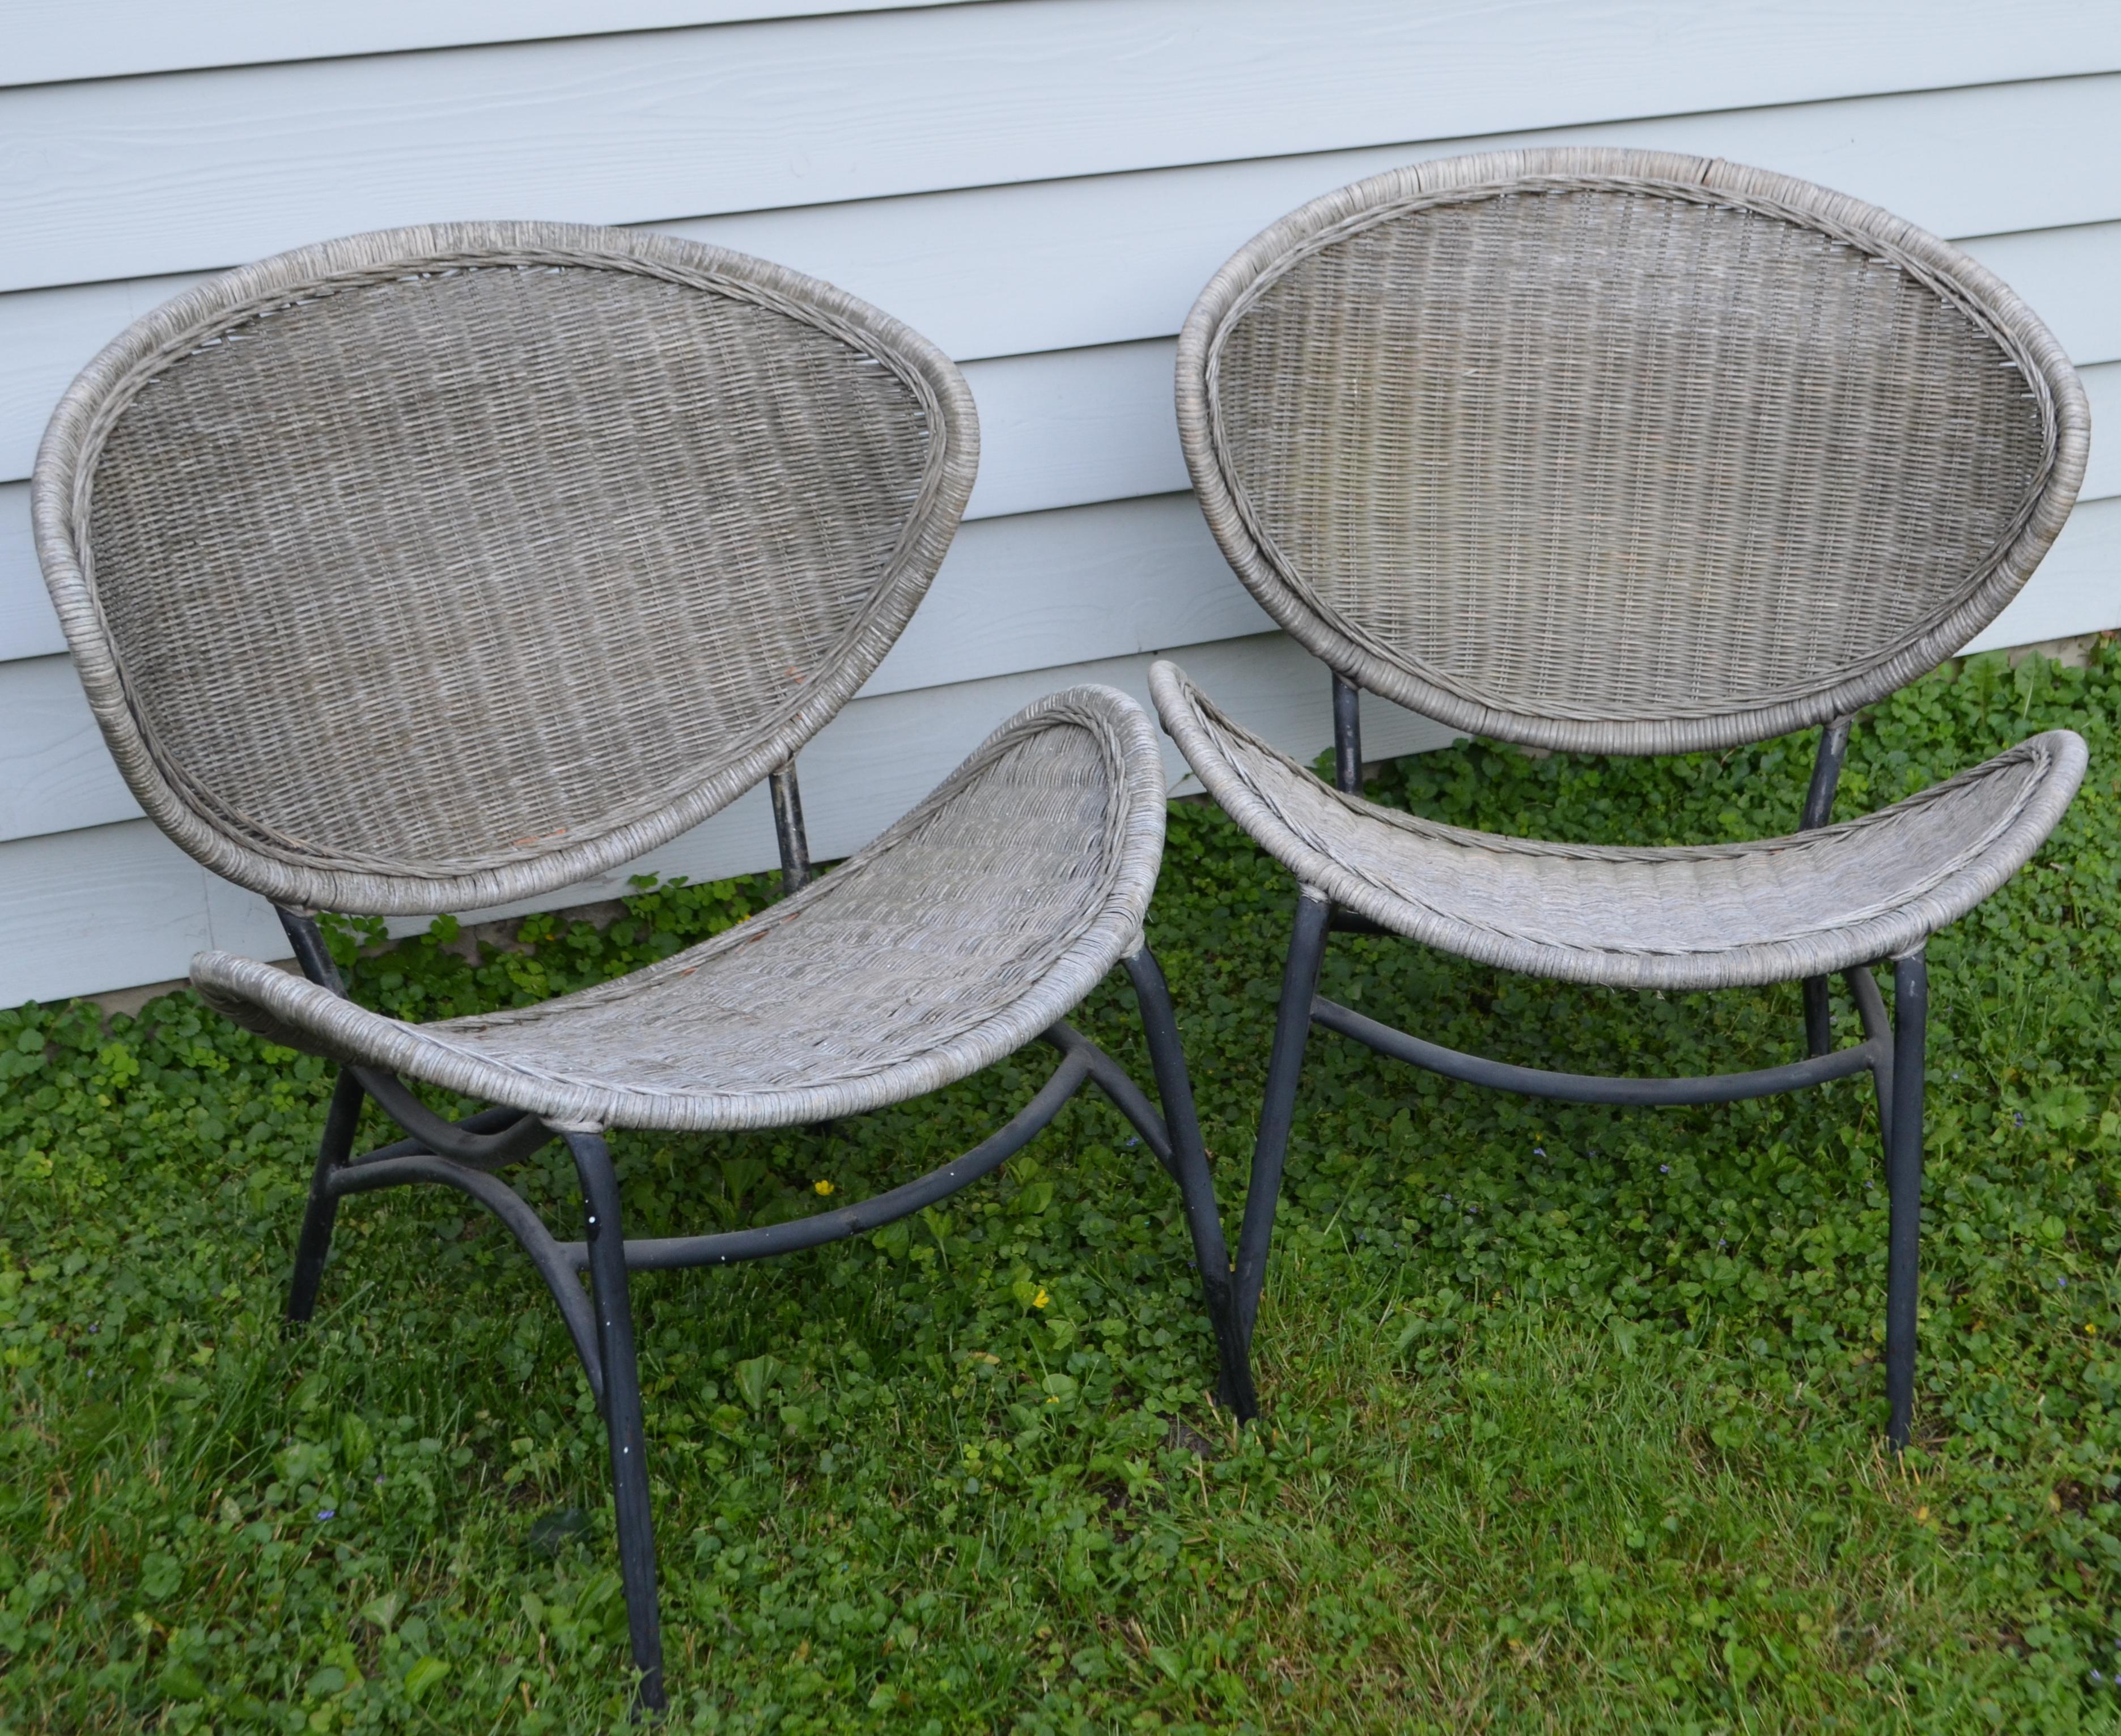 Mid-Century Modern Salterini Wicker Clamshell Chairs, Pair, with Steel Frame for Home, Patio, Porch